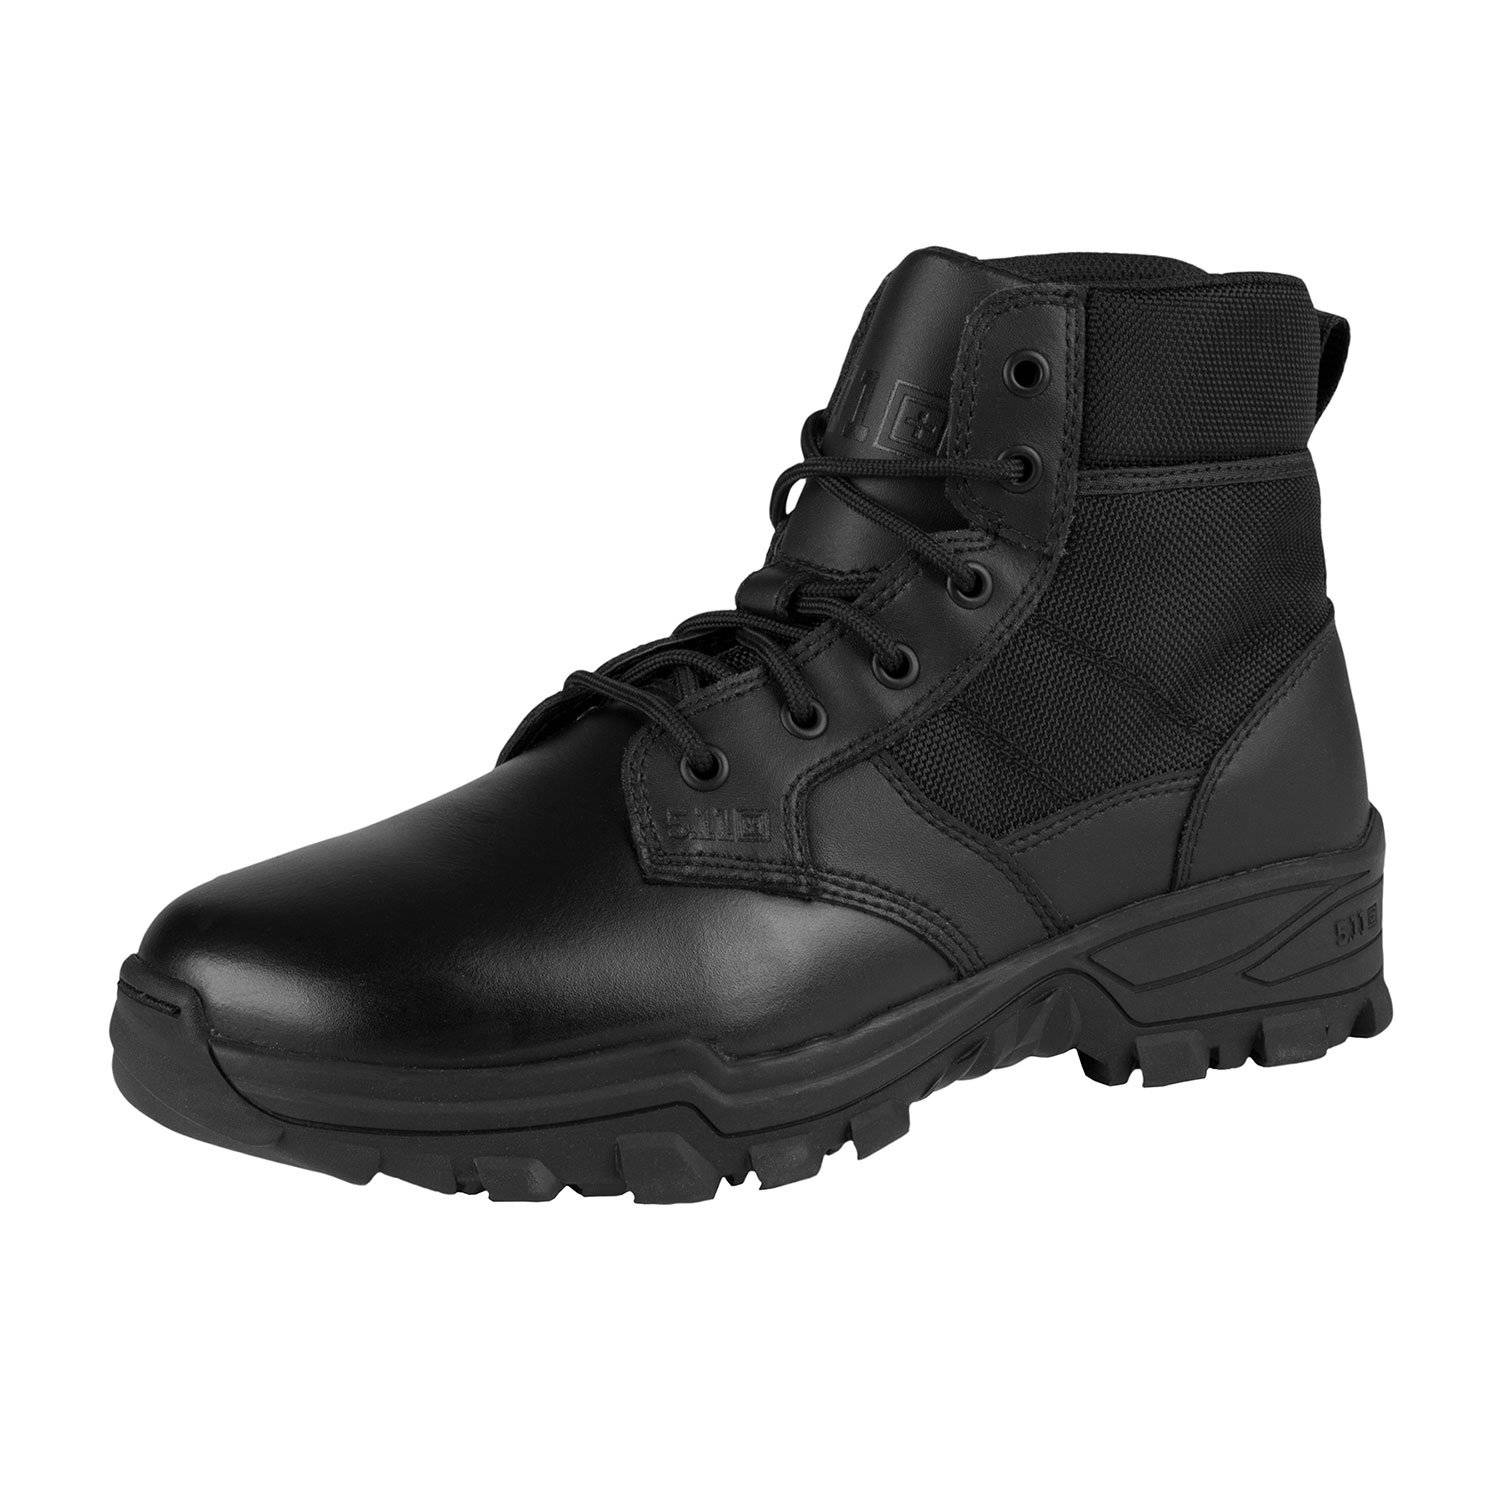 5.11 Tactical Speed 3.0 5" Boots